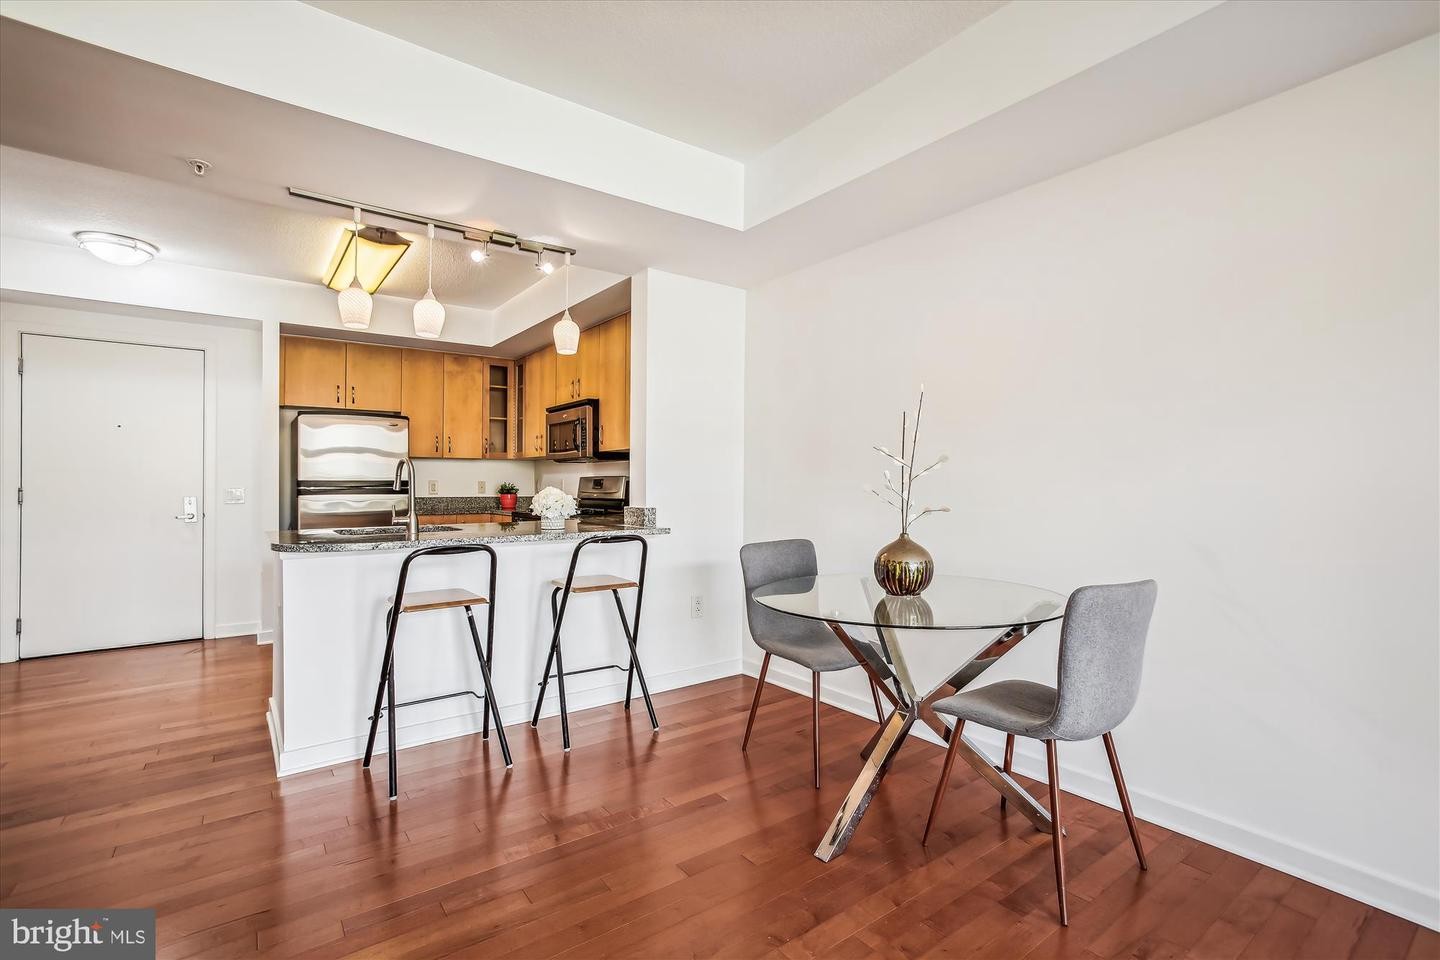 8. 475 K St NW 